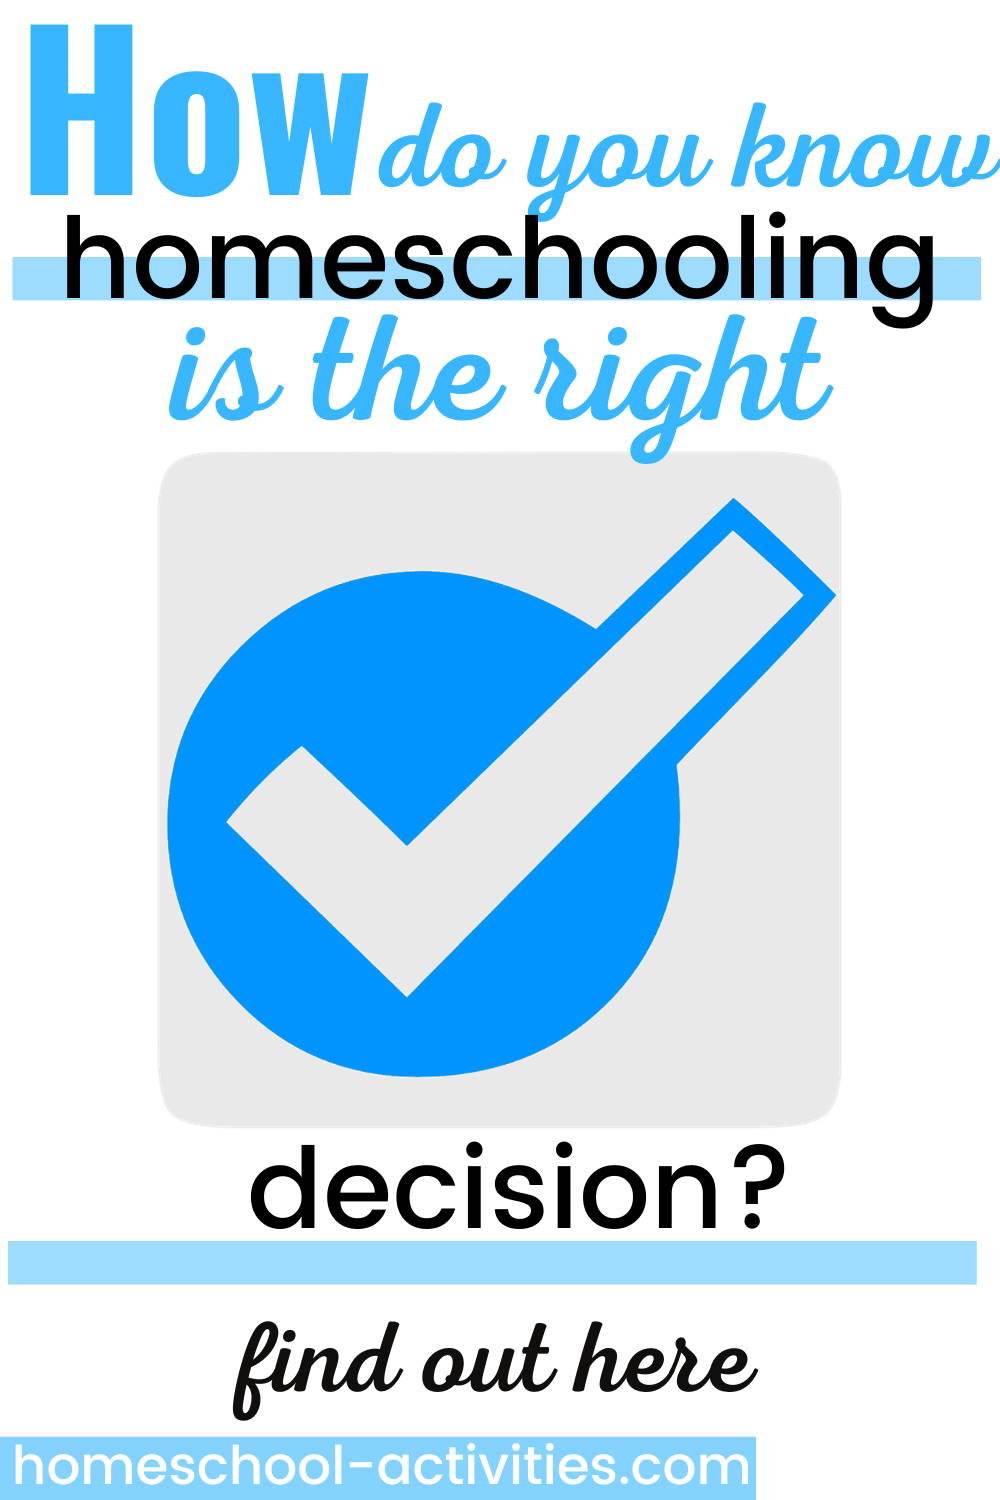 Is homeschooling the right choice?